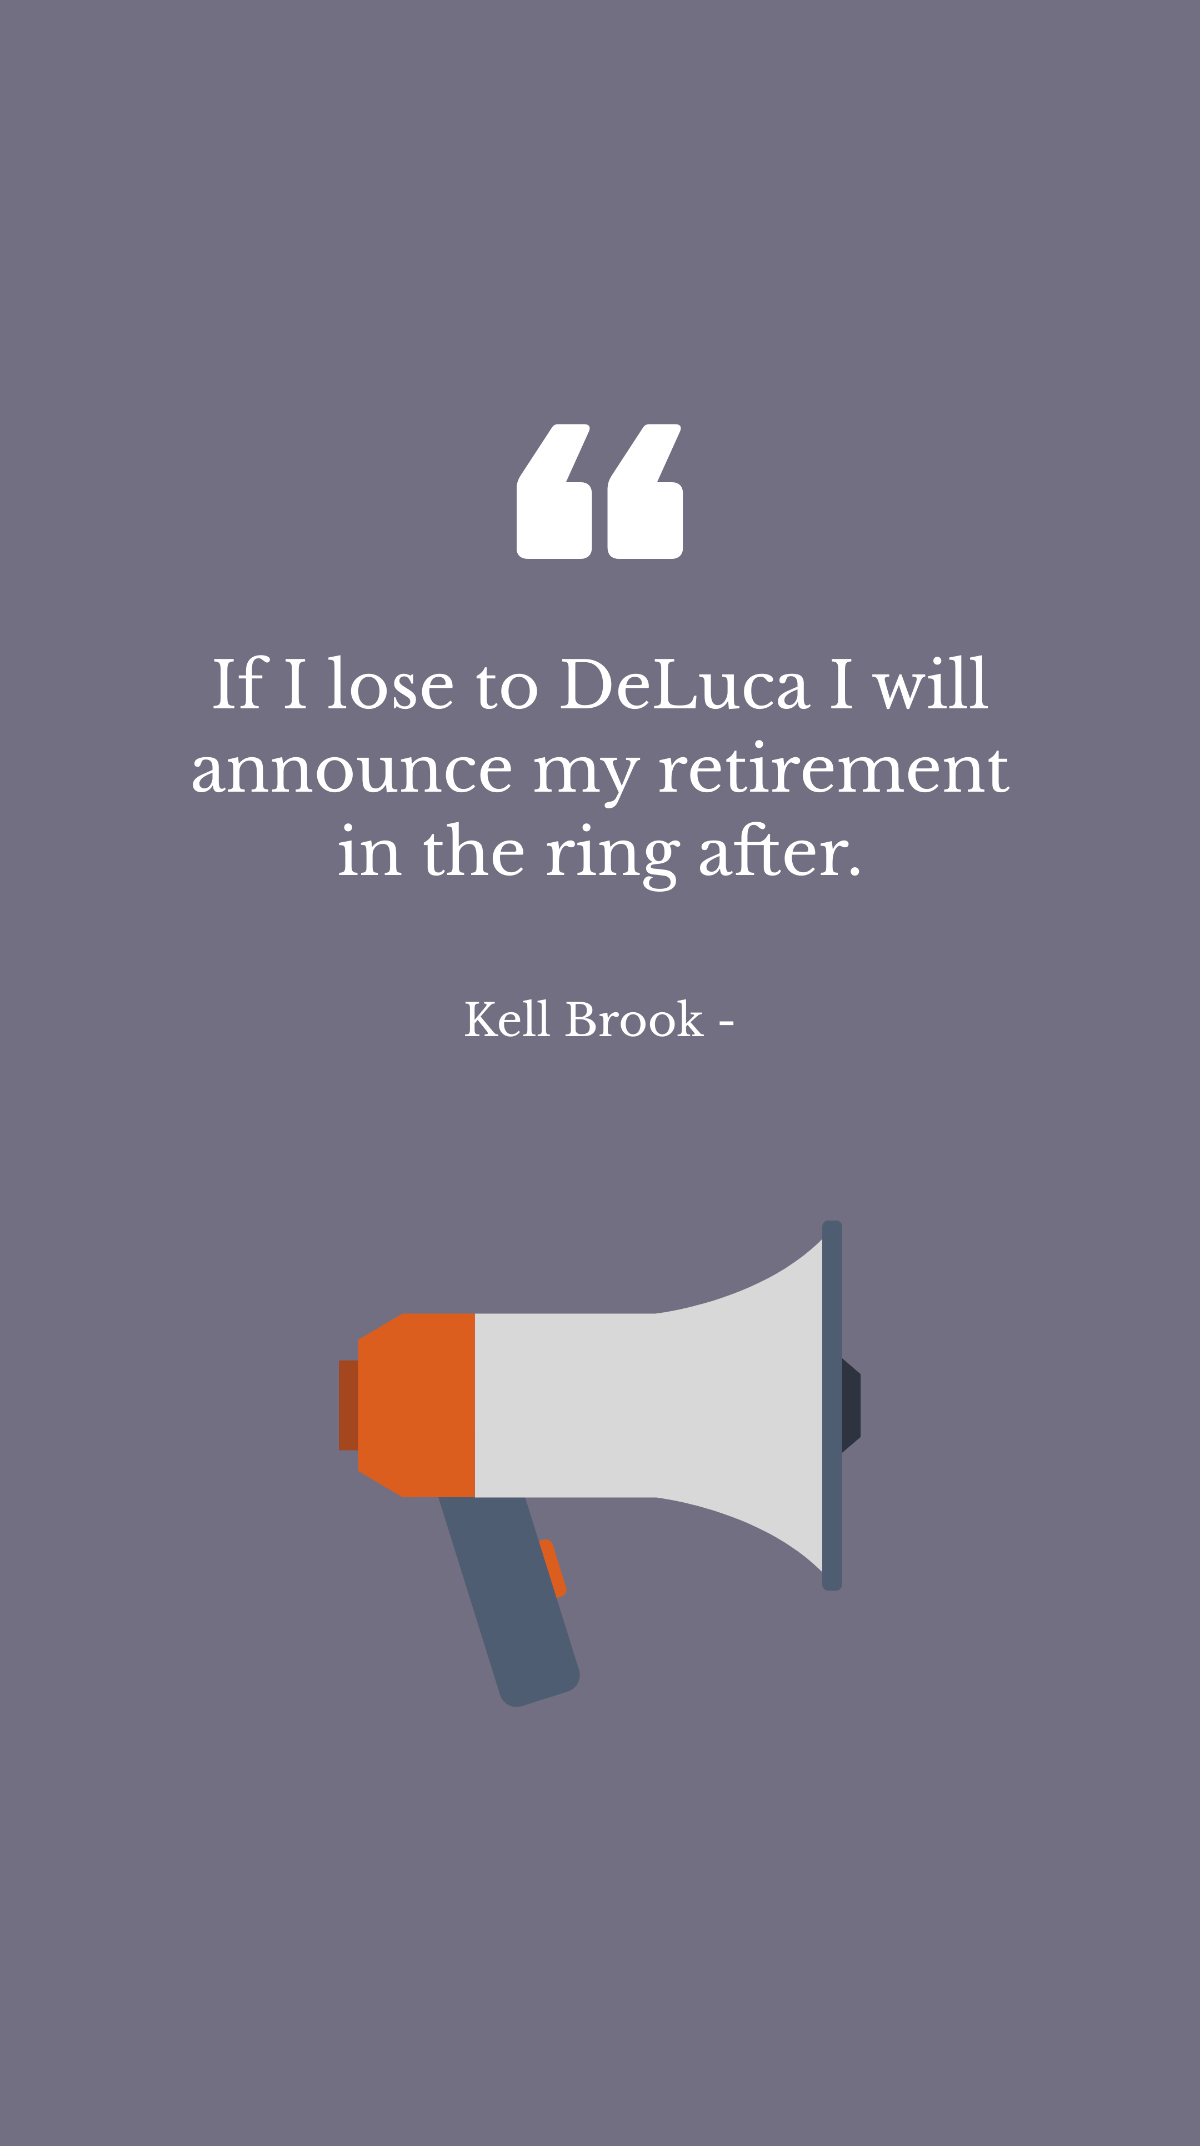 Kell Brook - If I lose to DeLuca I will announce my retirement in the ring after. Template